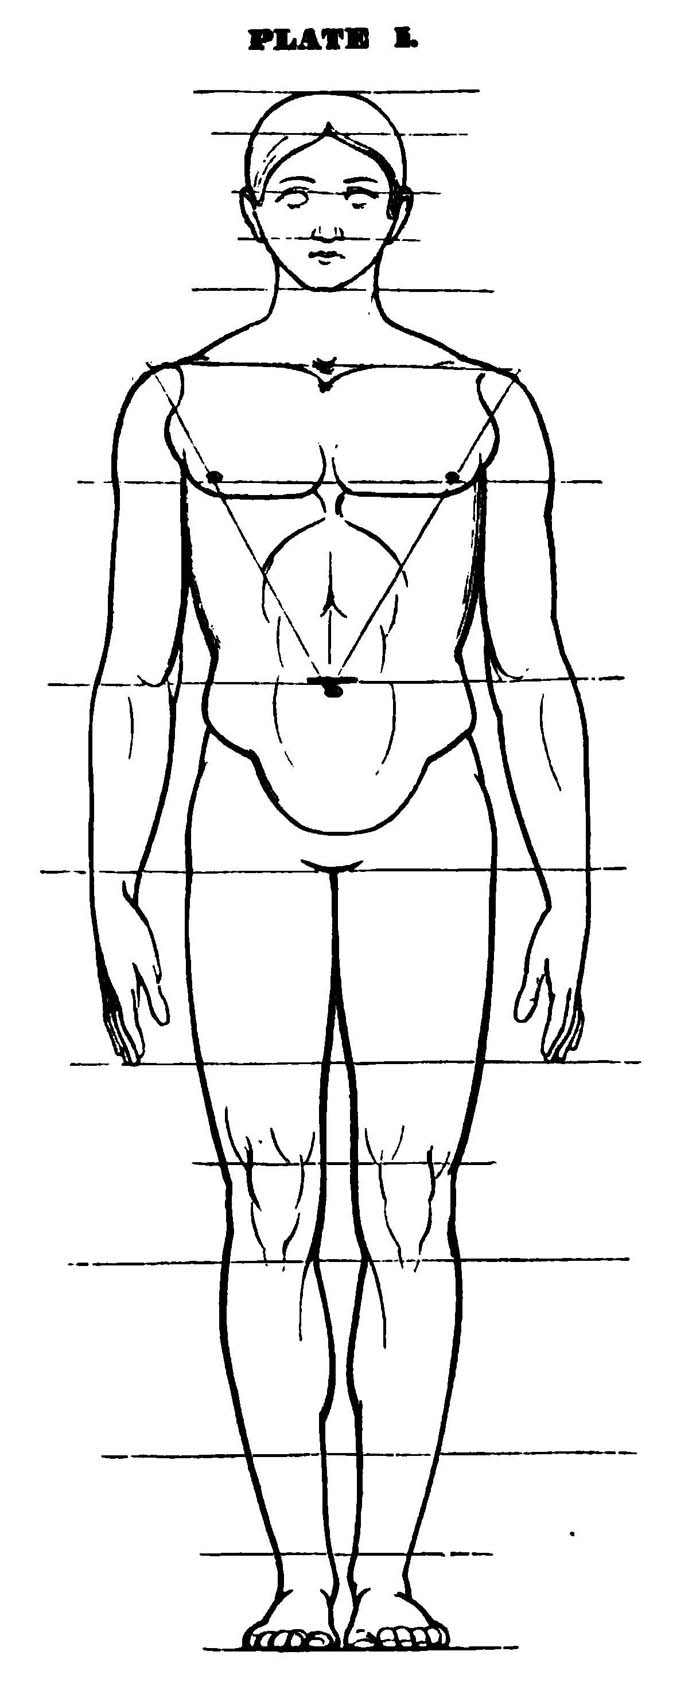 Drawing The Human Head Face And Body In The Correct 